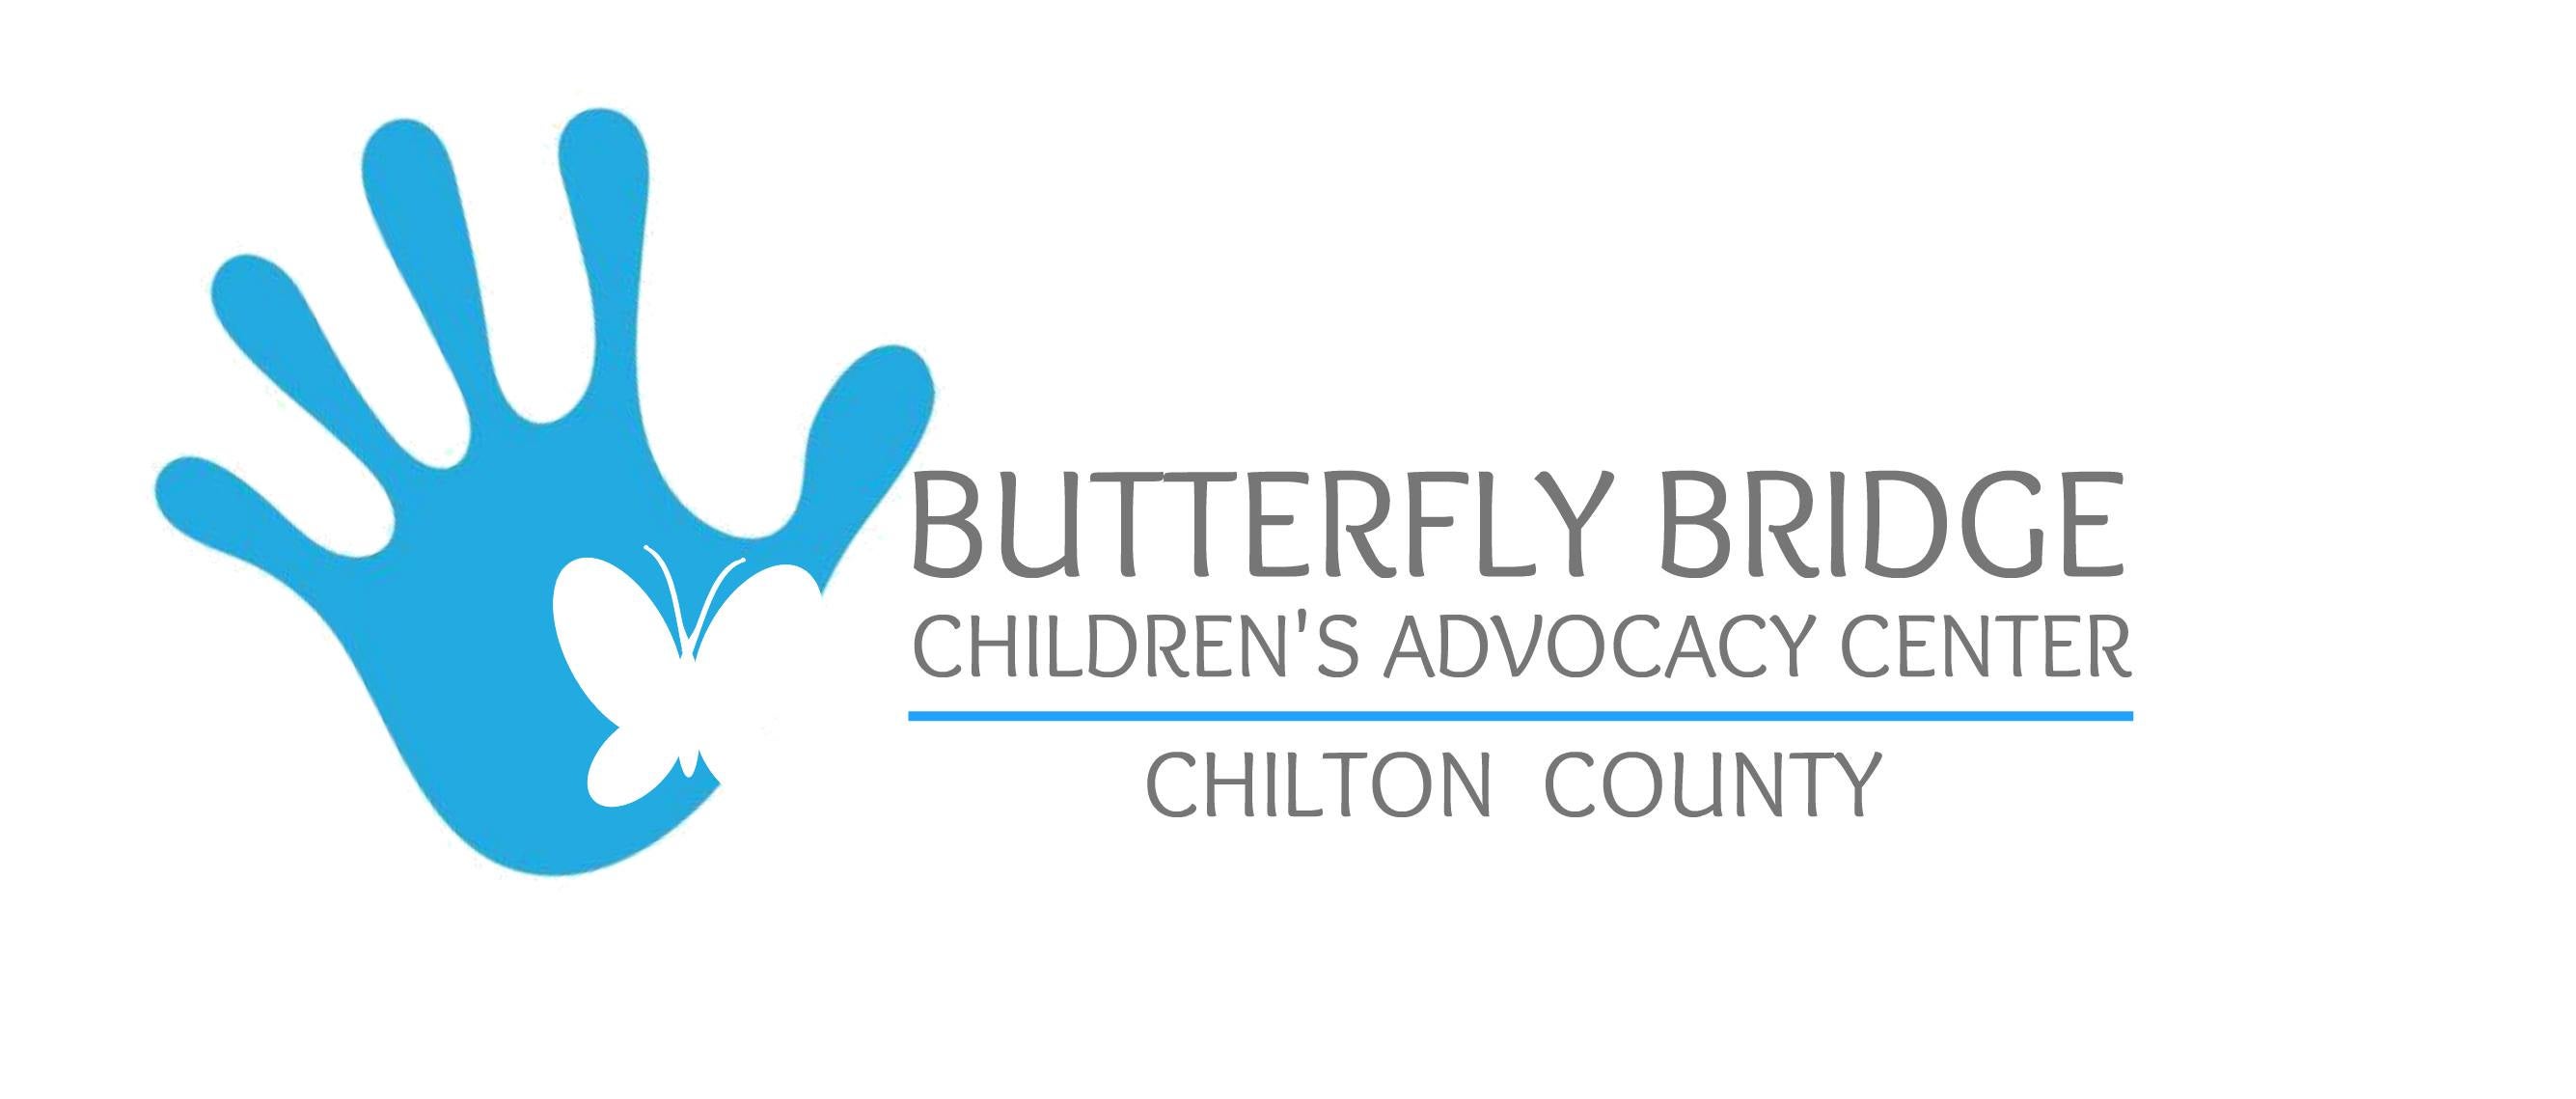 Wings of Hope: Butterfly Bridge event raises funds to help children